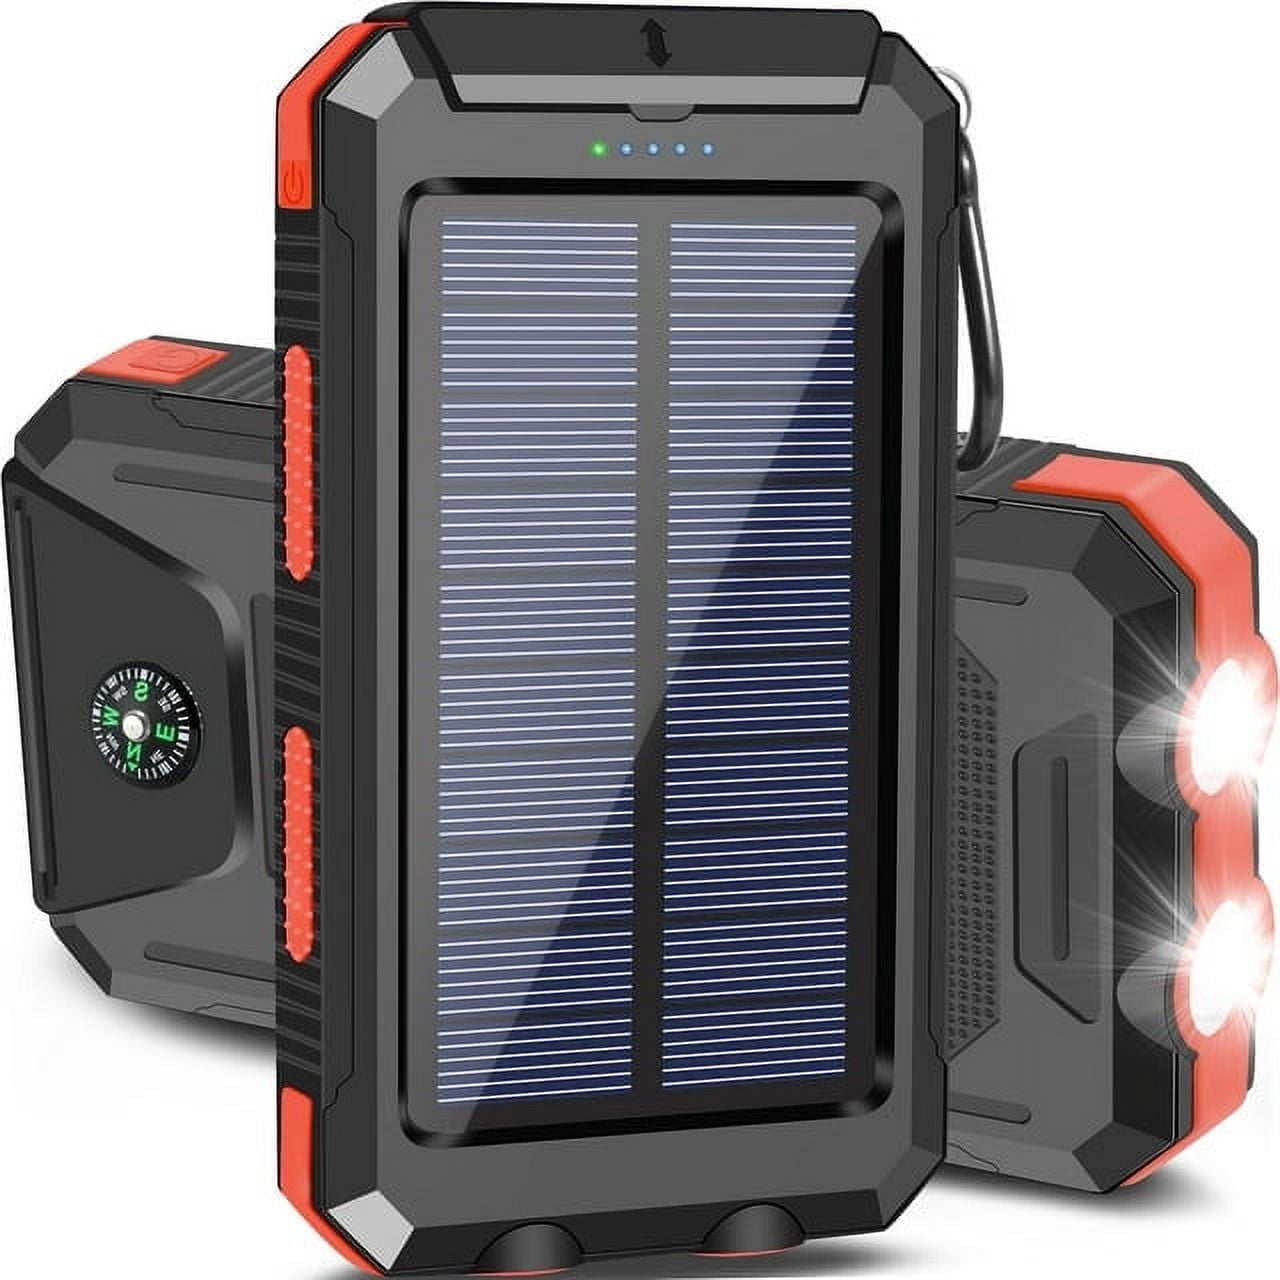 Durecopow 30000mAh Solar Charger for Cell Phone iPhone, Portable